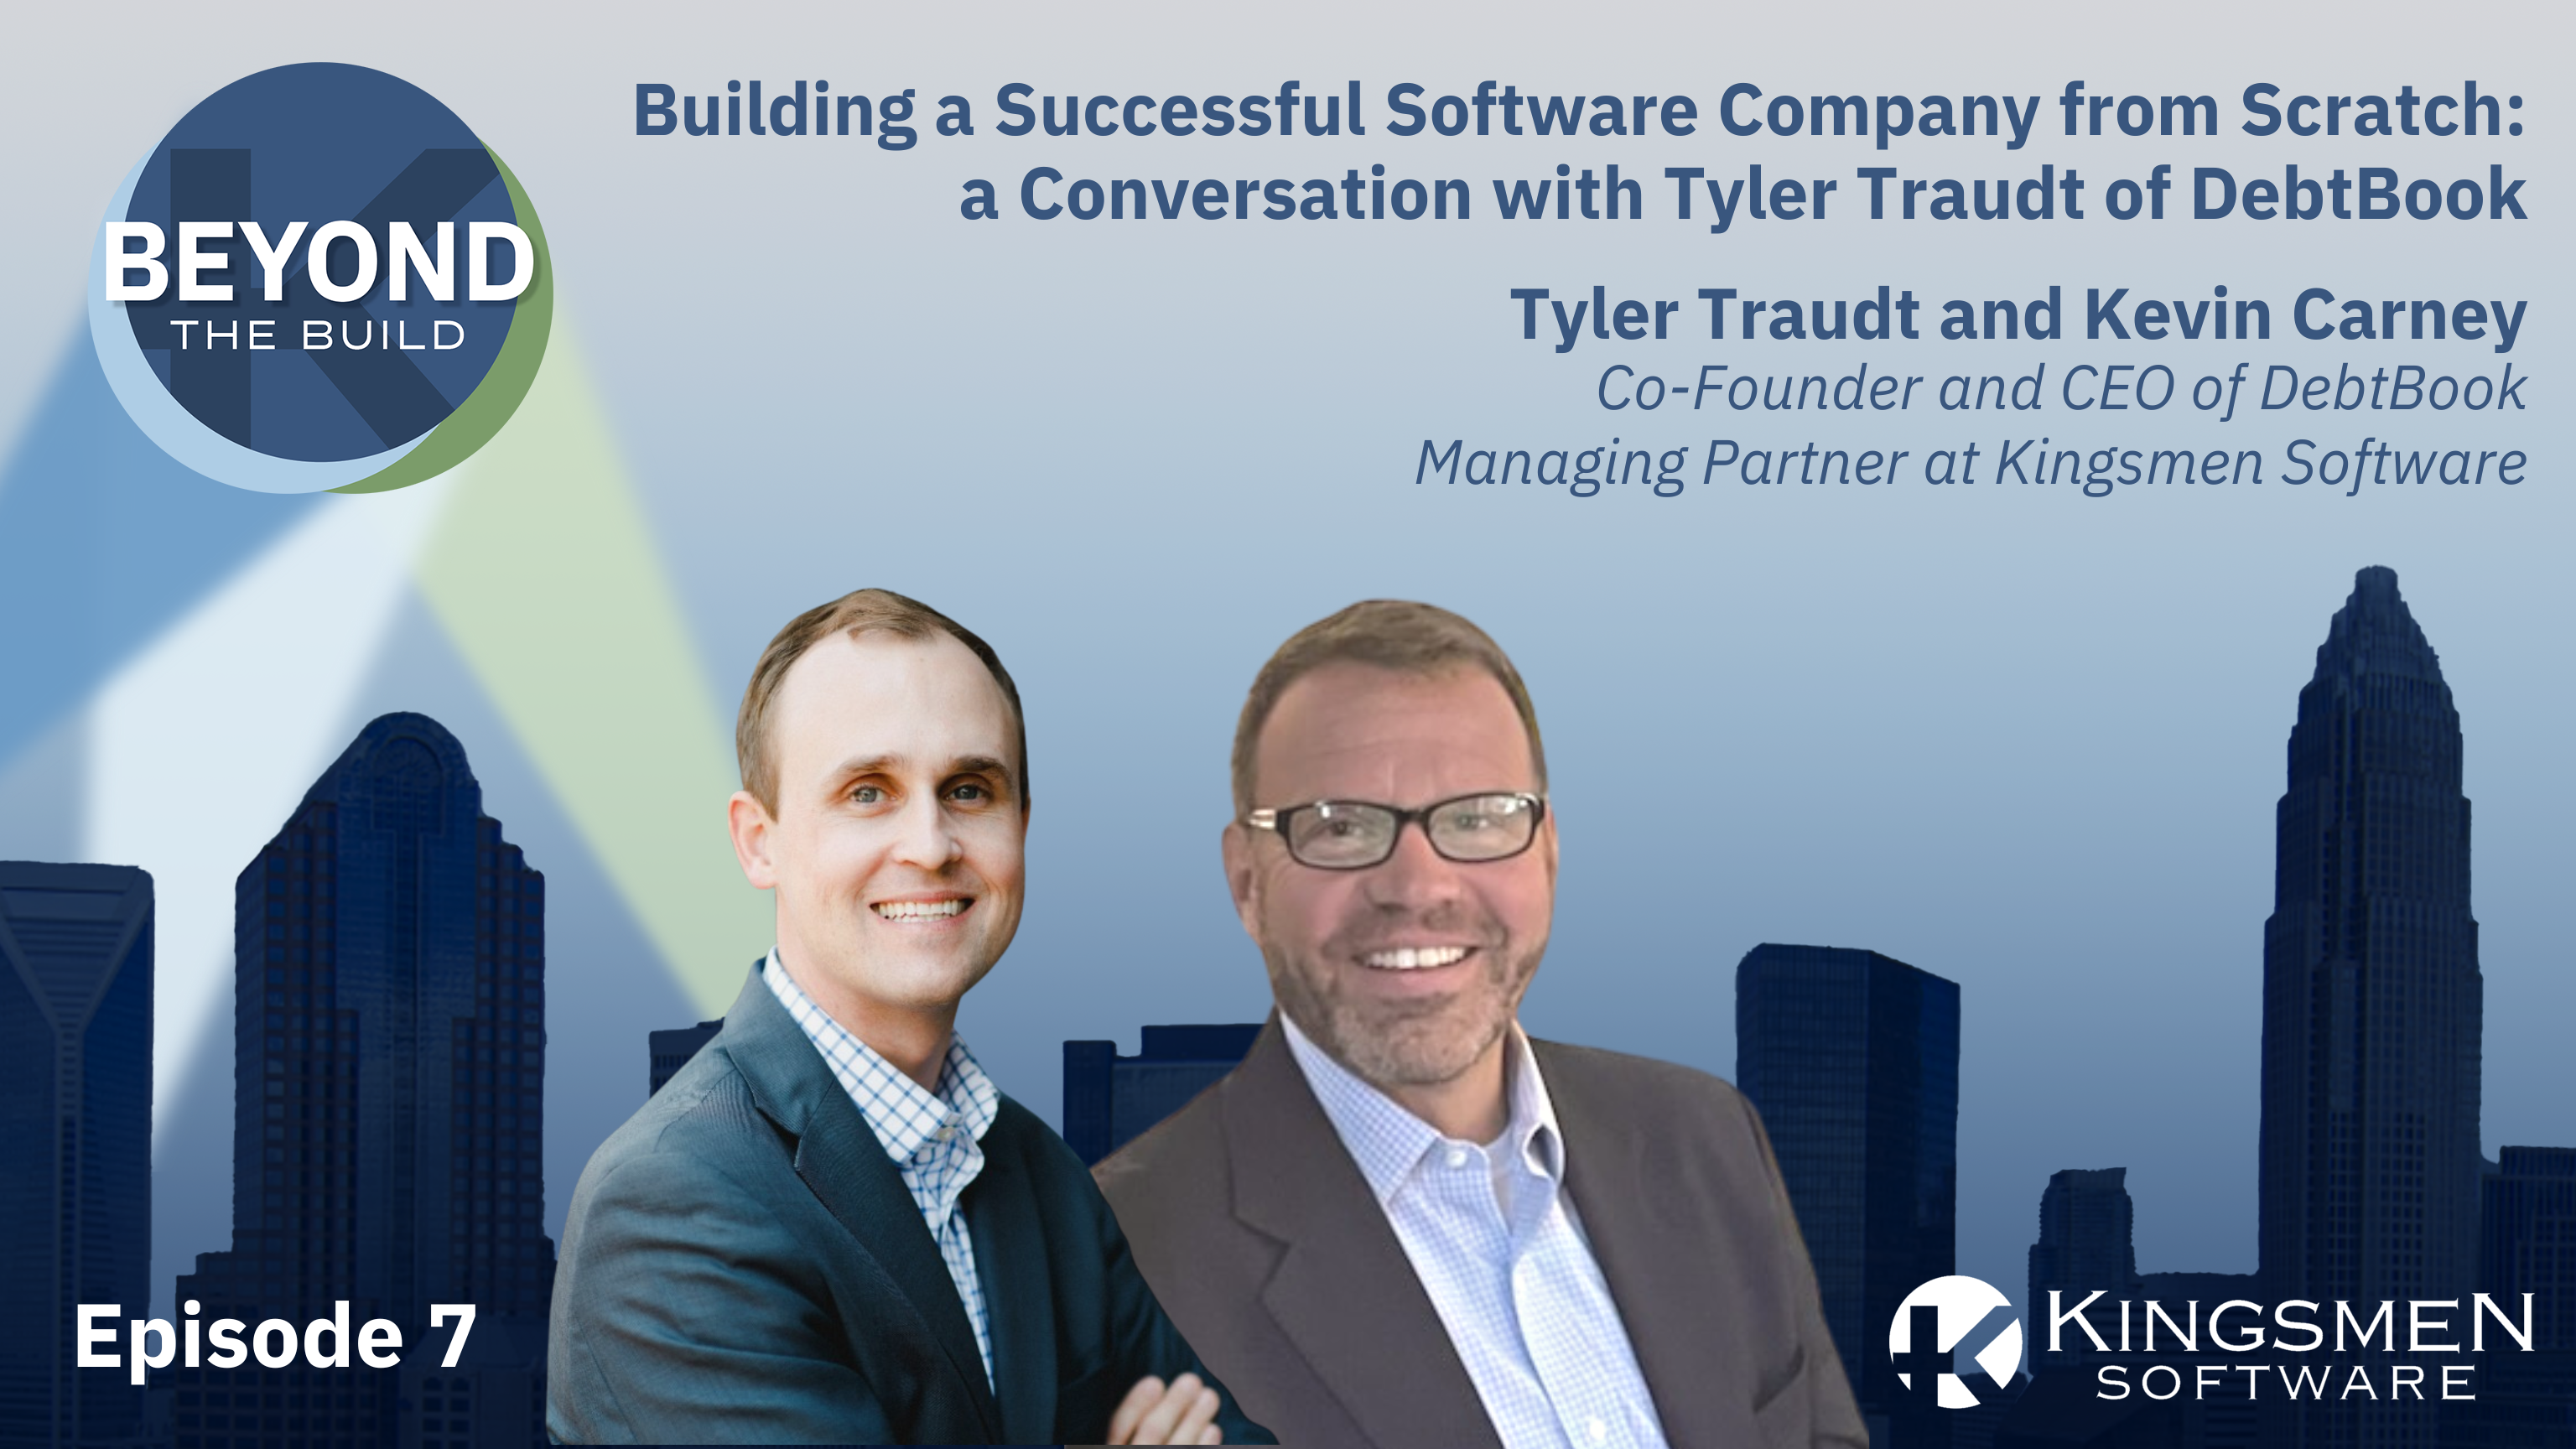 Episode 7: Building a Successful Software Company from Scratch: A Conversation with Tyler Traudt of DebtBook